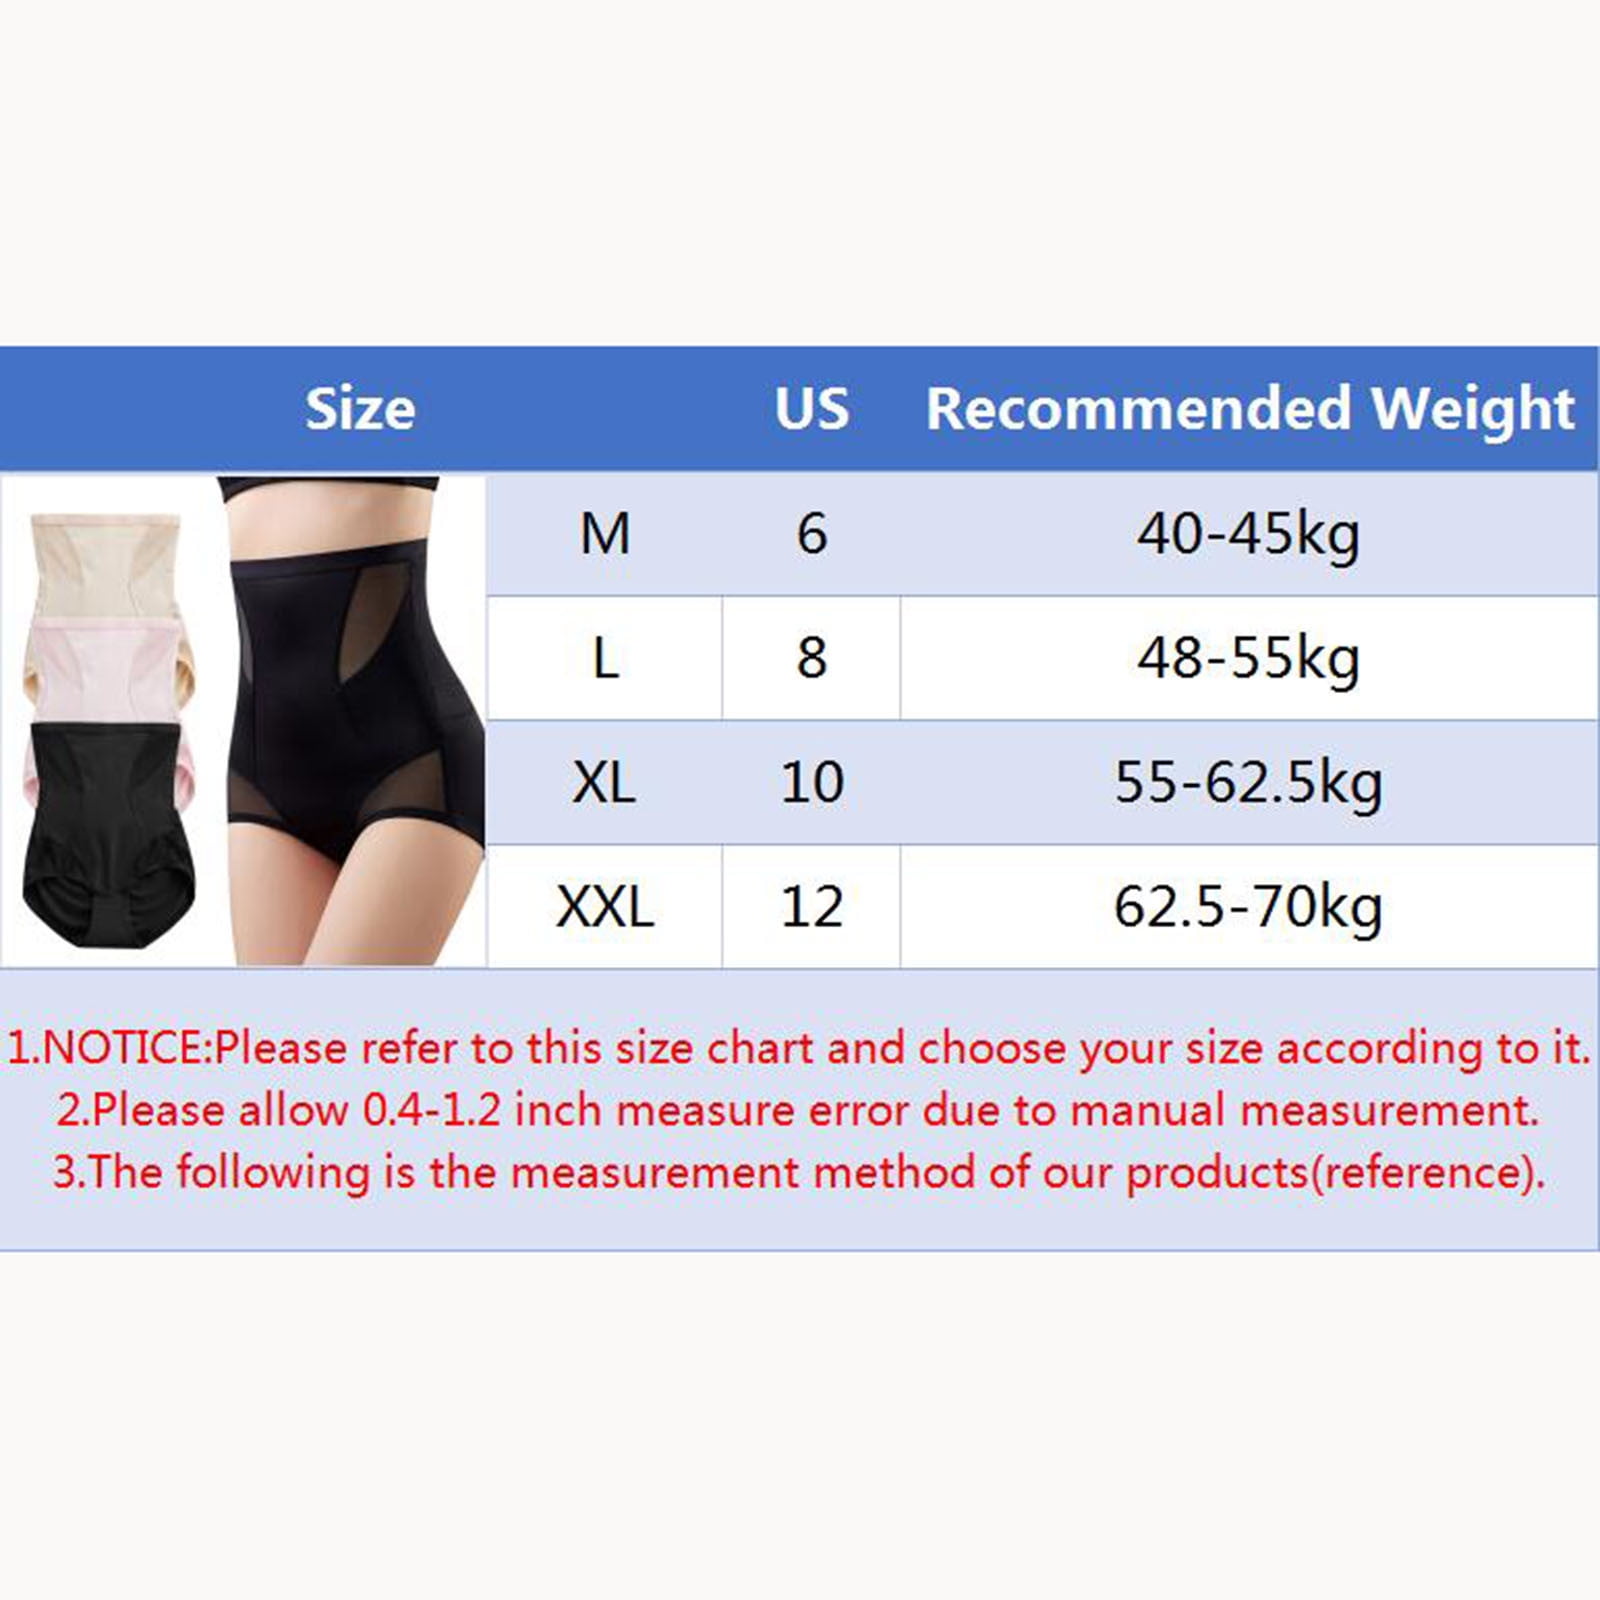 Eashery Sext Panty for Women Women's High Waist Cotton Underwear Stretch Briefs  Soft Comfy Ladies Panties Multicolor X-Large 